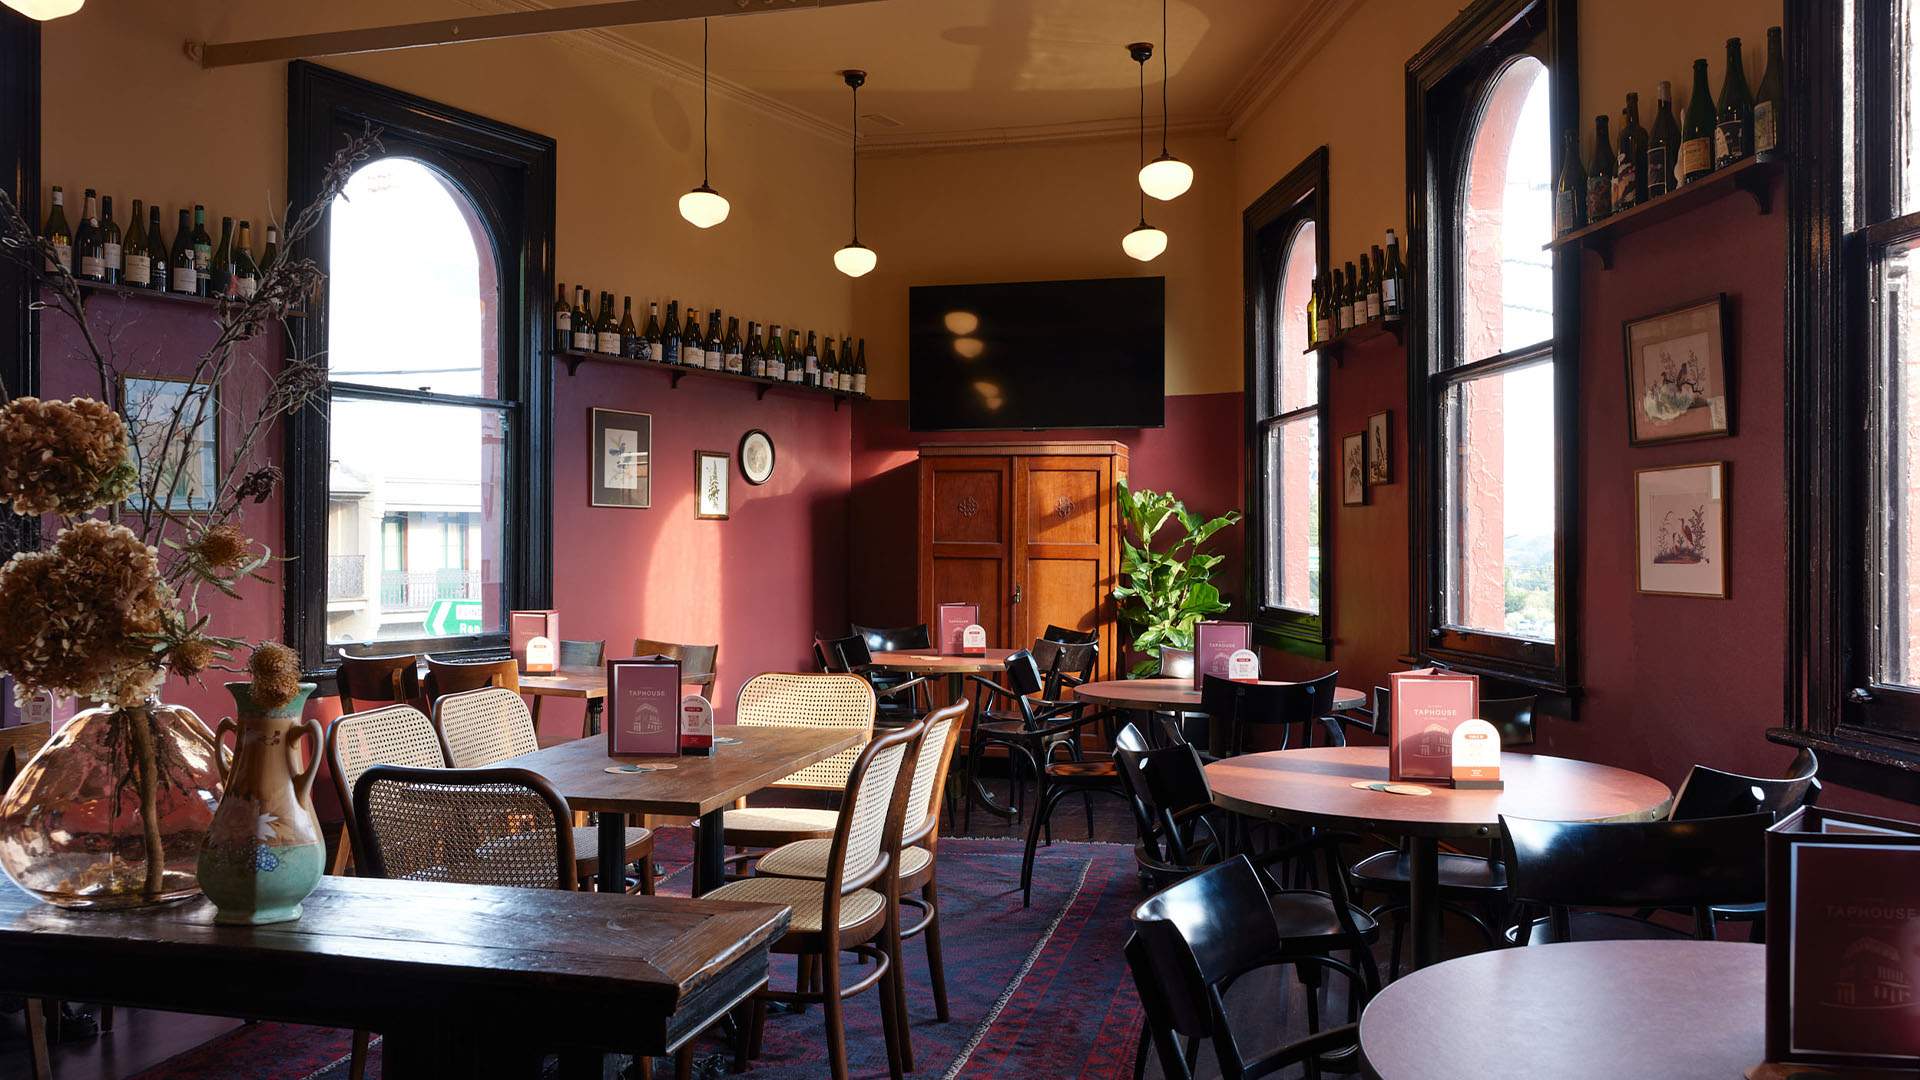 A classic pub interior featuring brown and yellow walls, a patterned blue and purple carpet, and wine bottles lining the shelves inside Darlinghurst's The Taphouse.